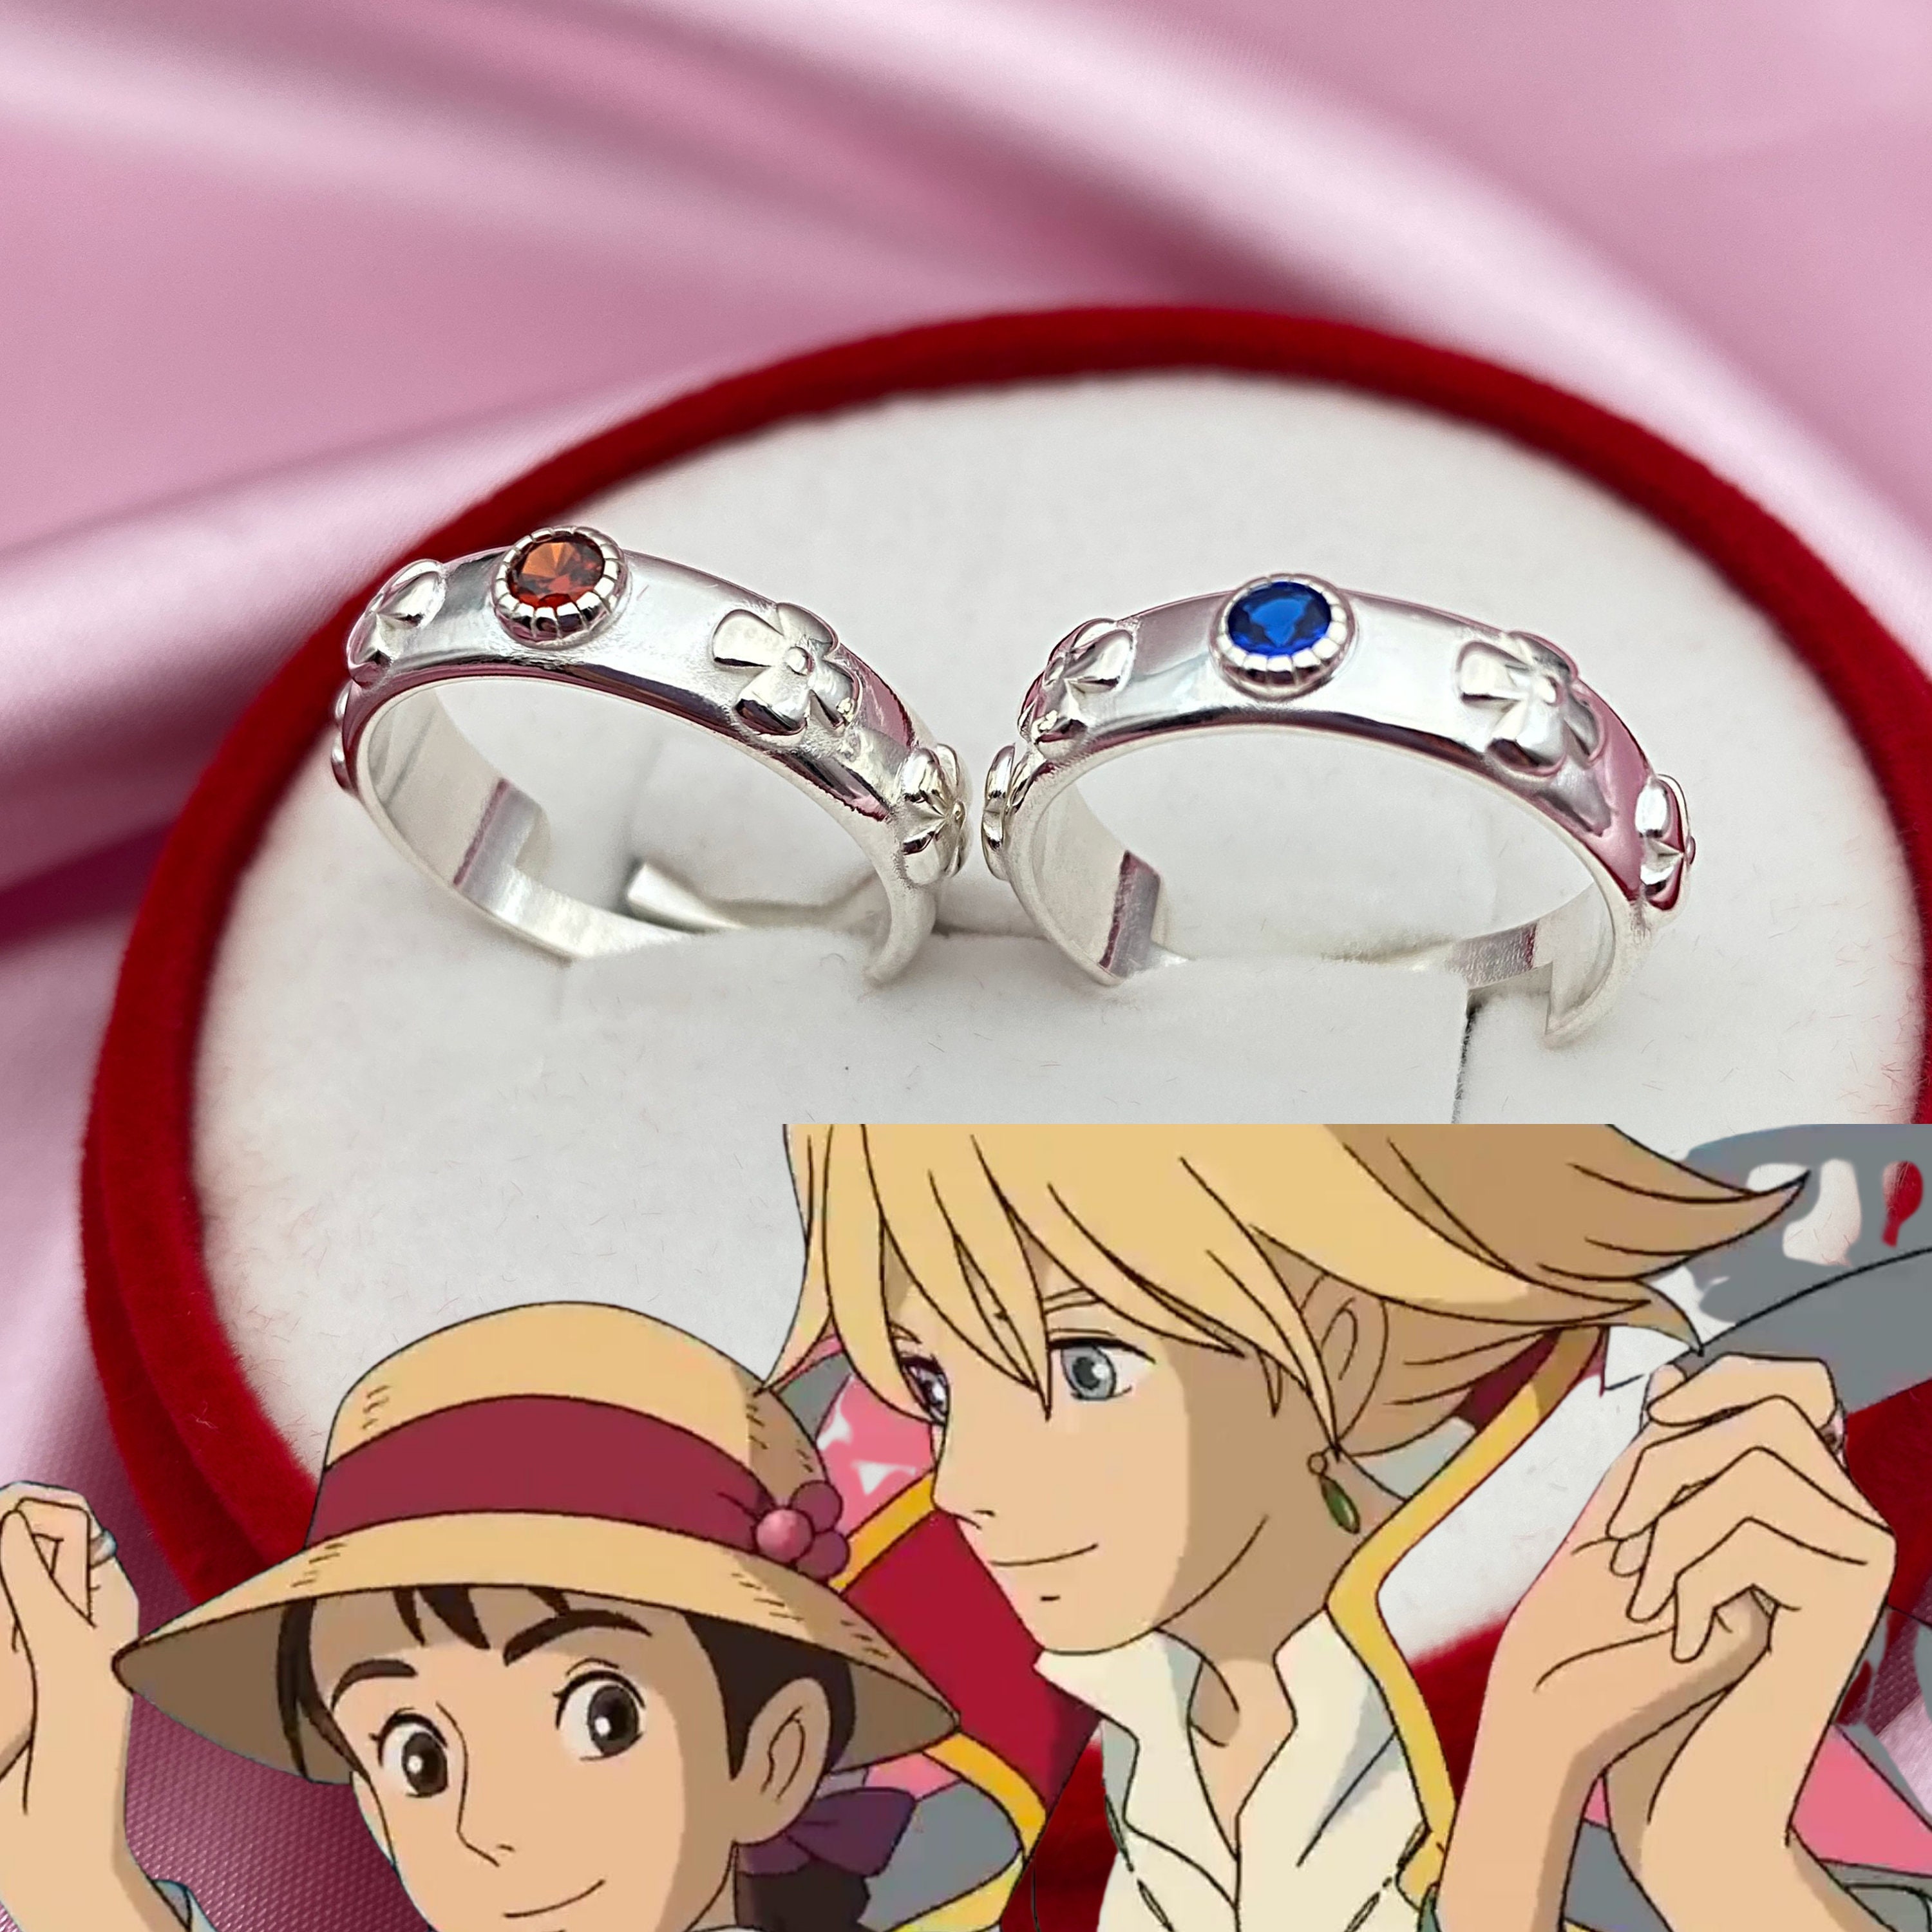 Howls Moving Castle Ring, Sterling Silver Garnet Wedding Ring, Flower Engagement Ring, Unique Promise Ring, Anime Jewelry